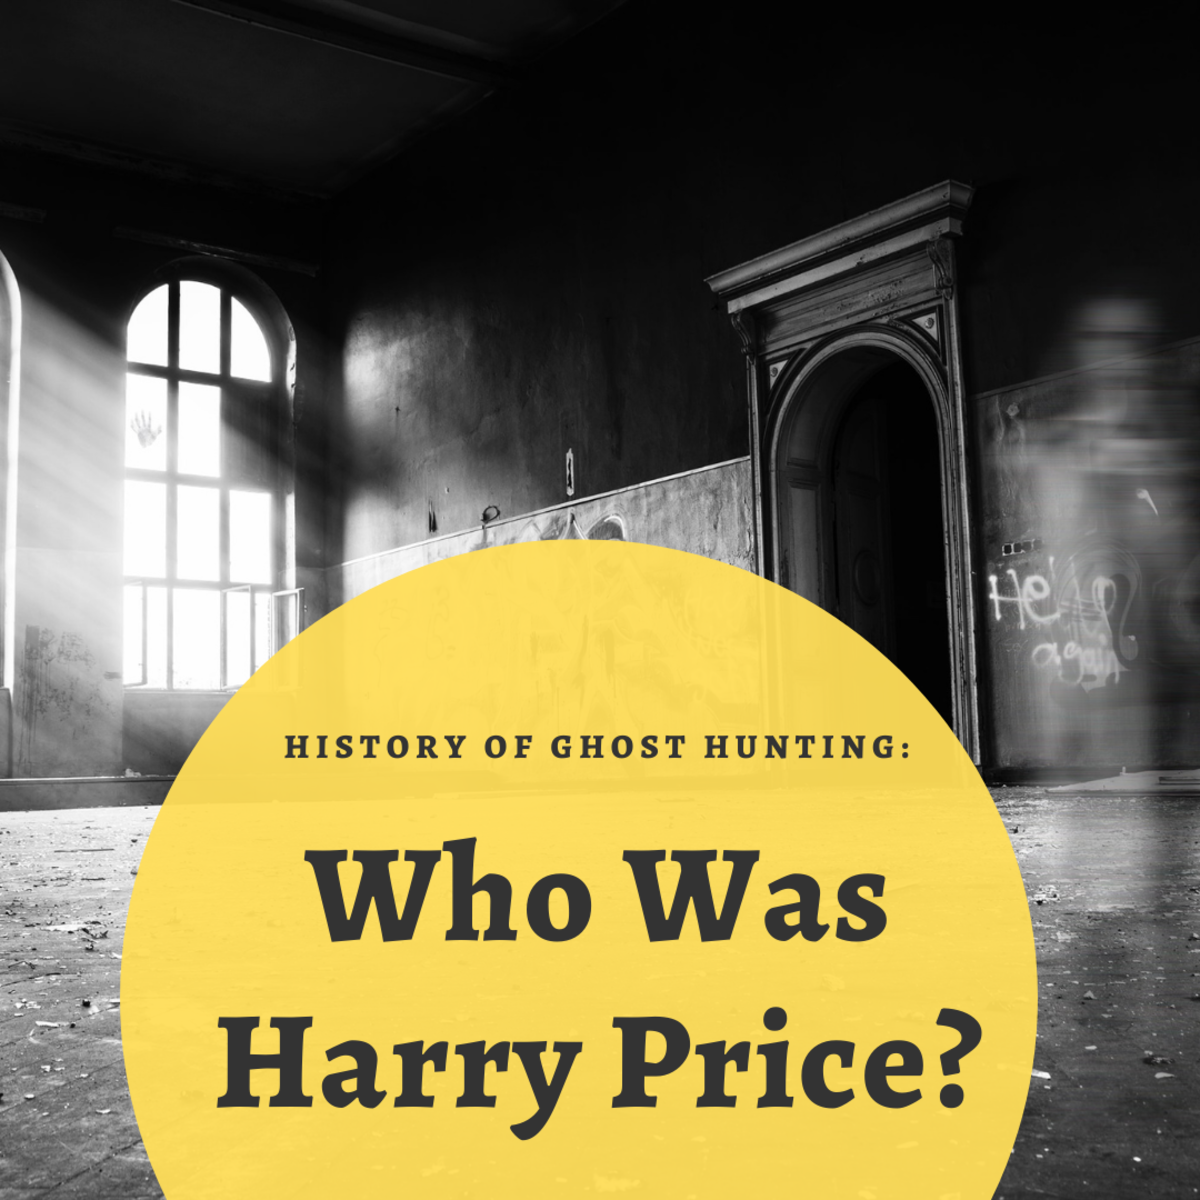 Ghost hunting has been around for quite some time. . . 